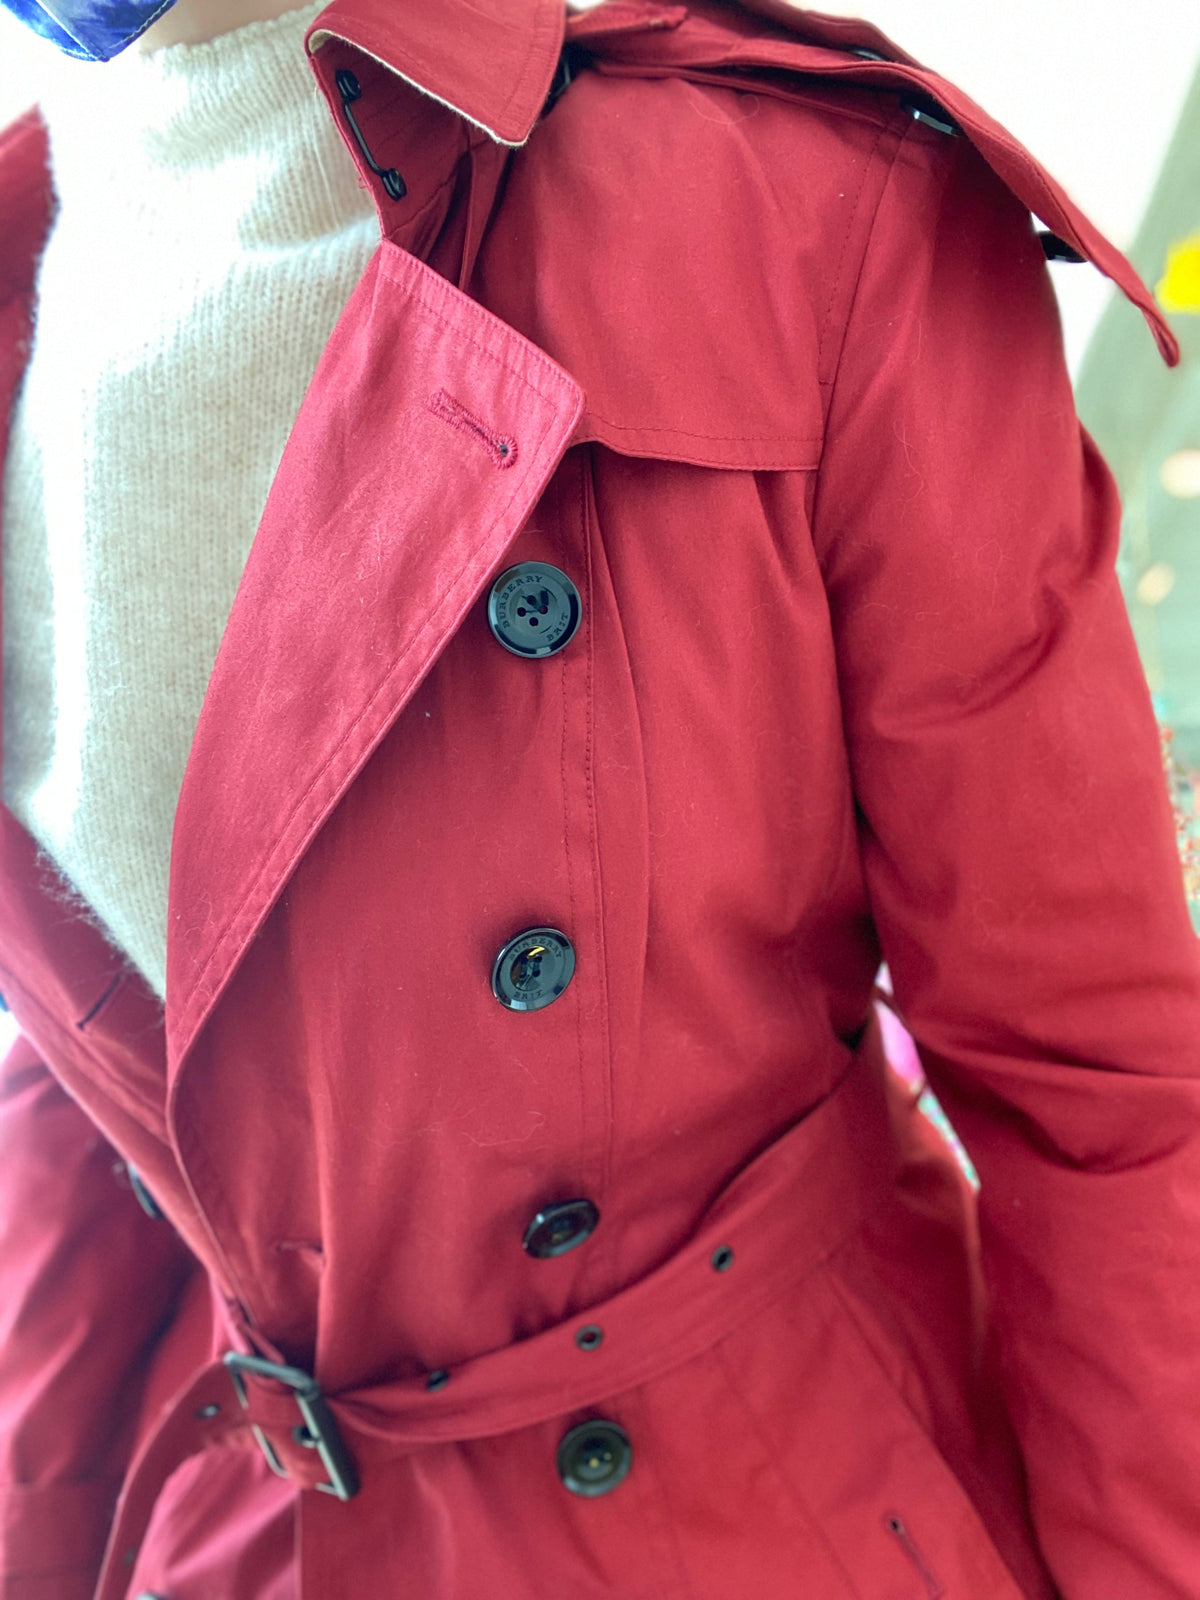 red trench coat 